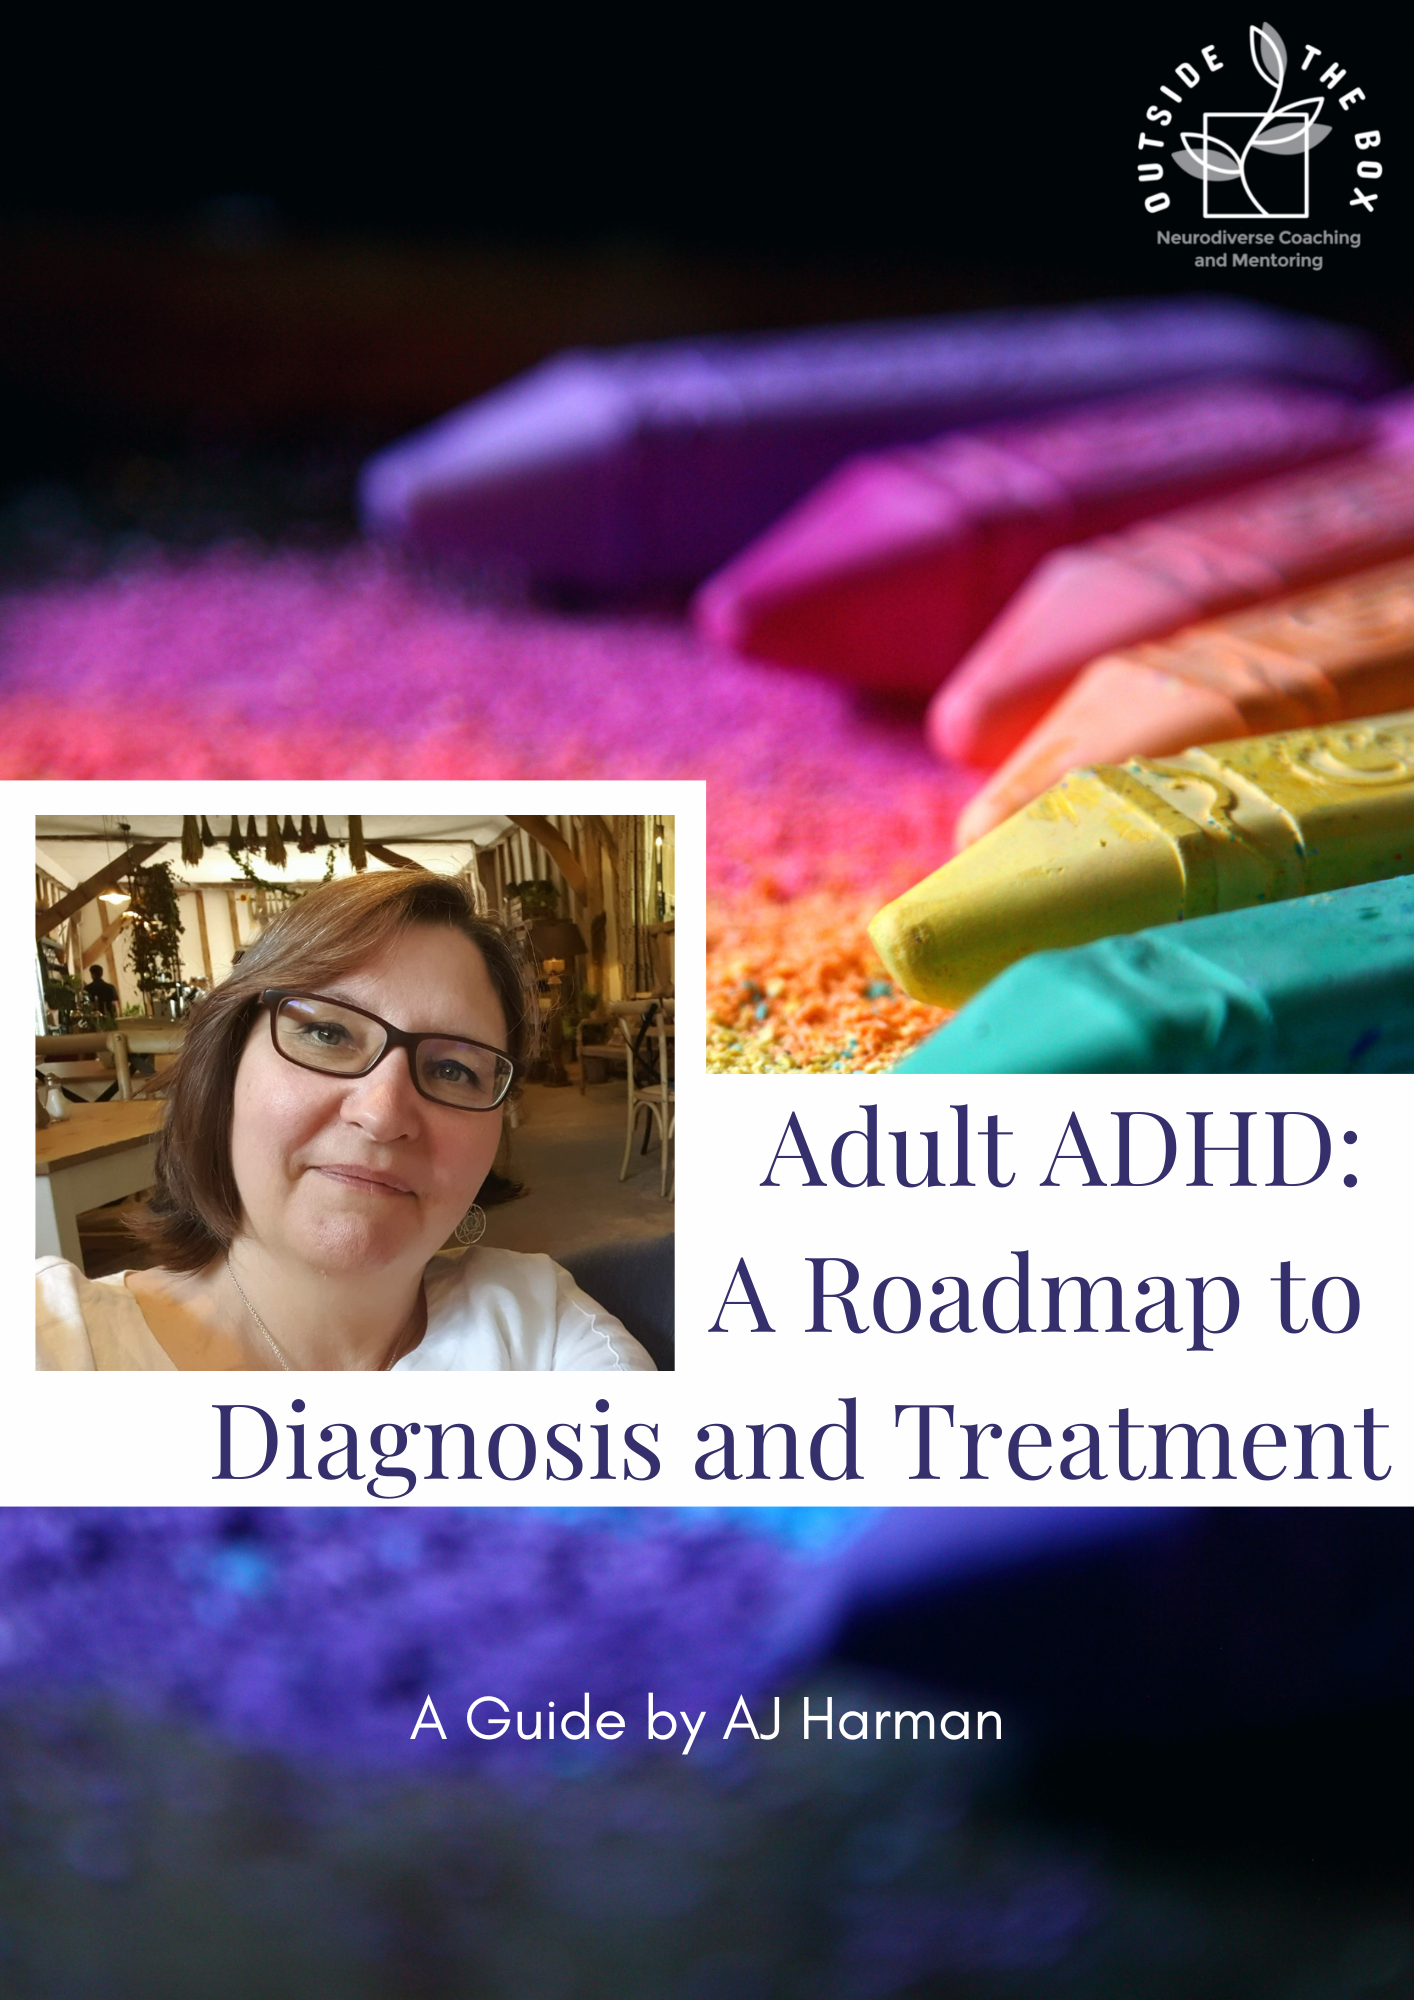 Adult ADHD A Roadmap to Diagnosis and Treatment